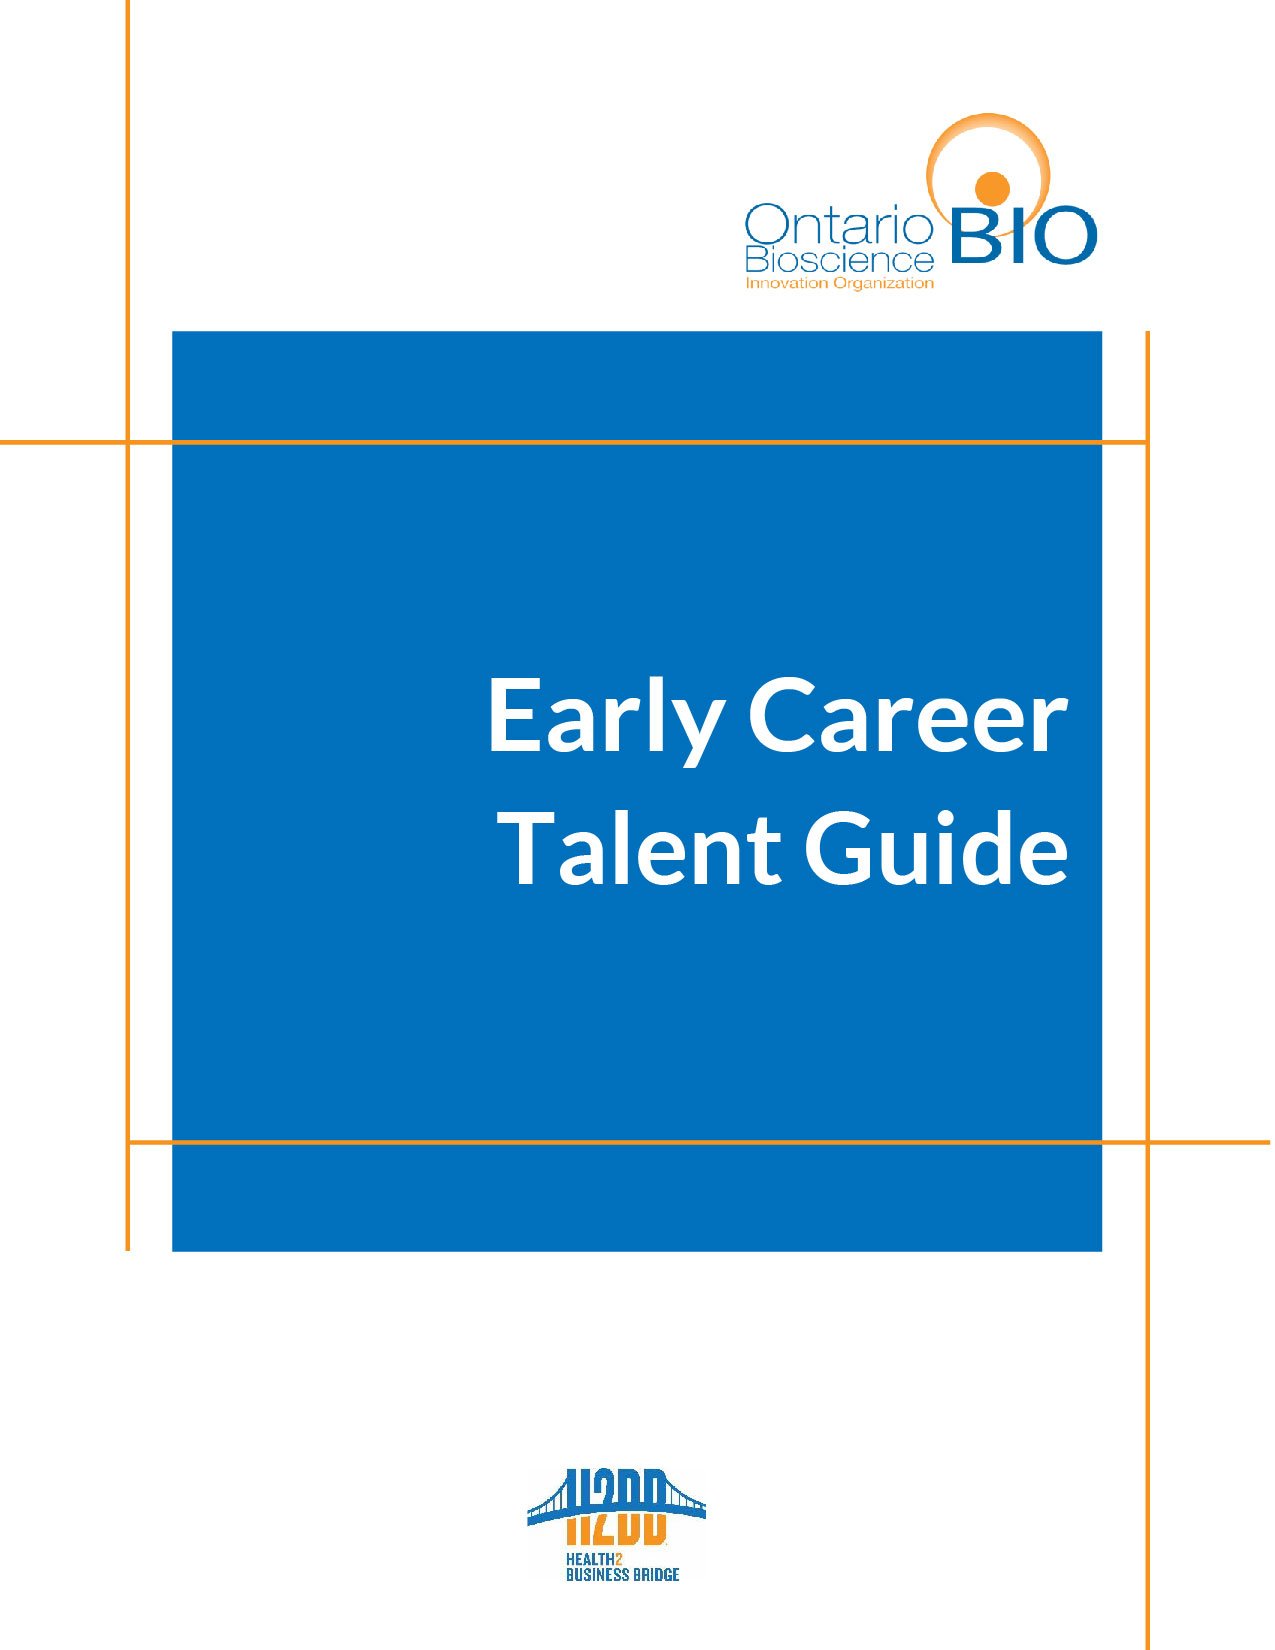 2023 Early Career Talent Guide_cover graphic.jpg